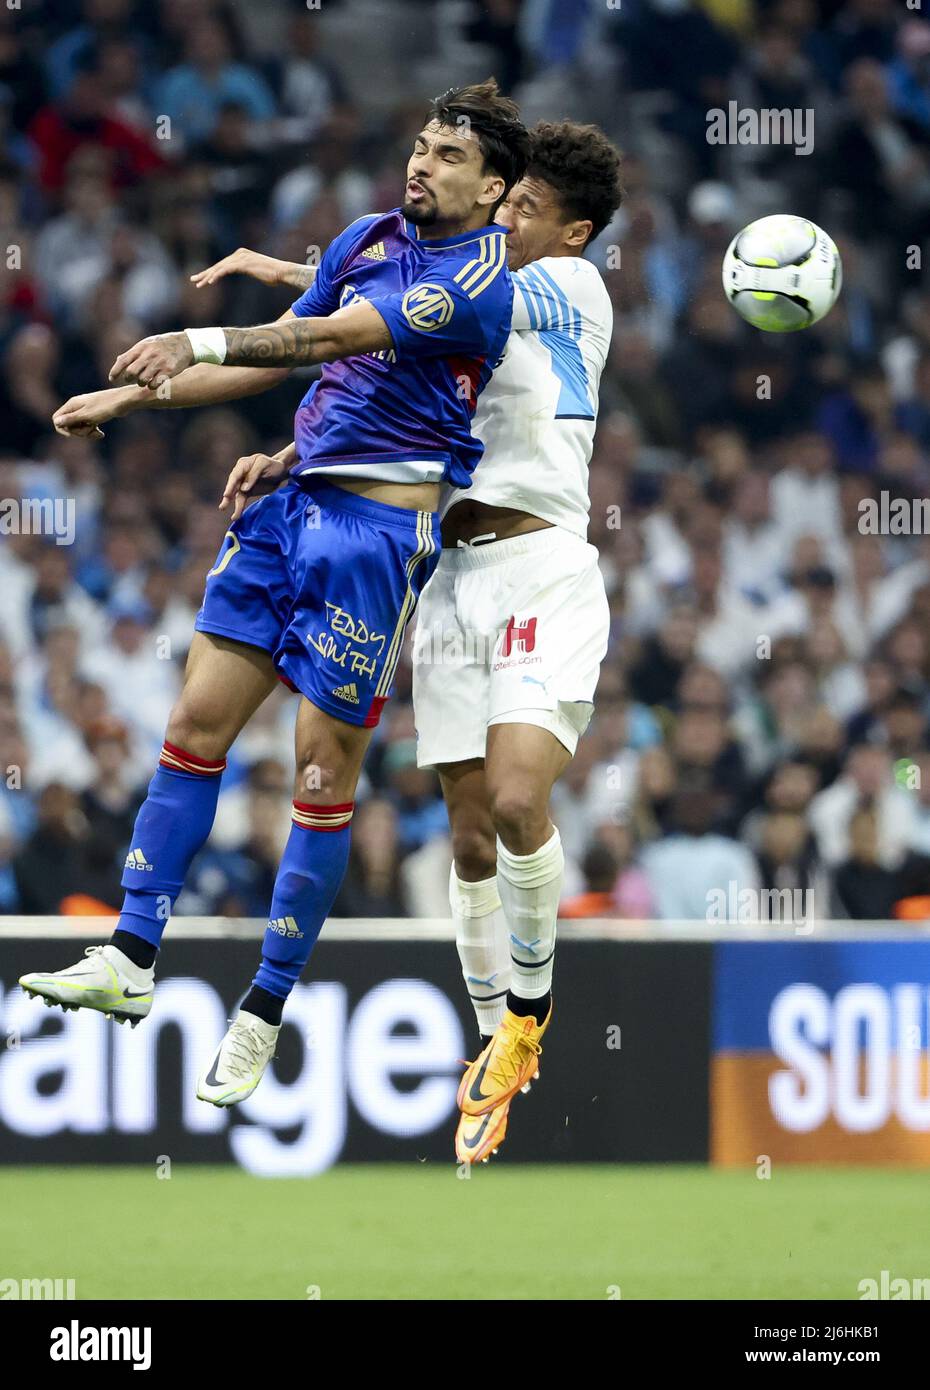 Lucas Paqueta of Lyon, Boubacar Kamara of Marseille during the French  championship Ligue 1 football match between Olympique de Marseille (OM) and Olympique  Lyonnais (OL, Lyon) on May 1, 2022 at Stade